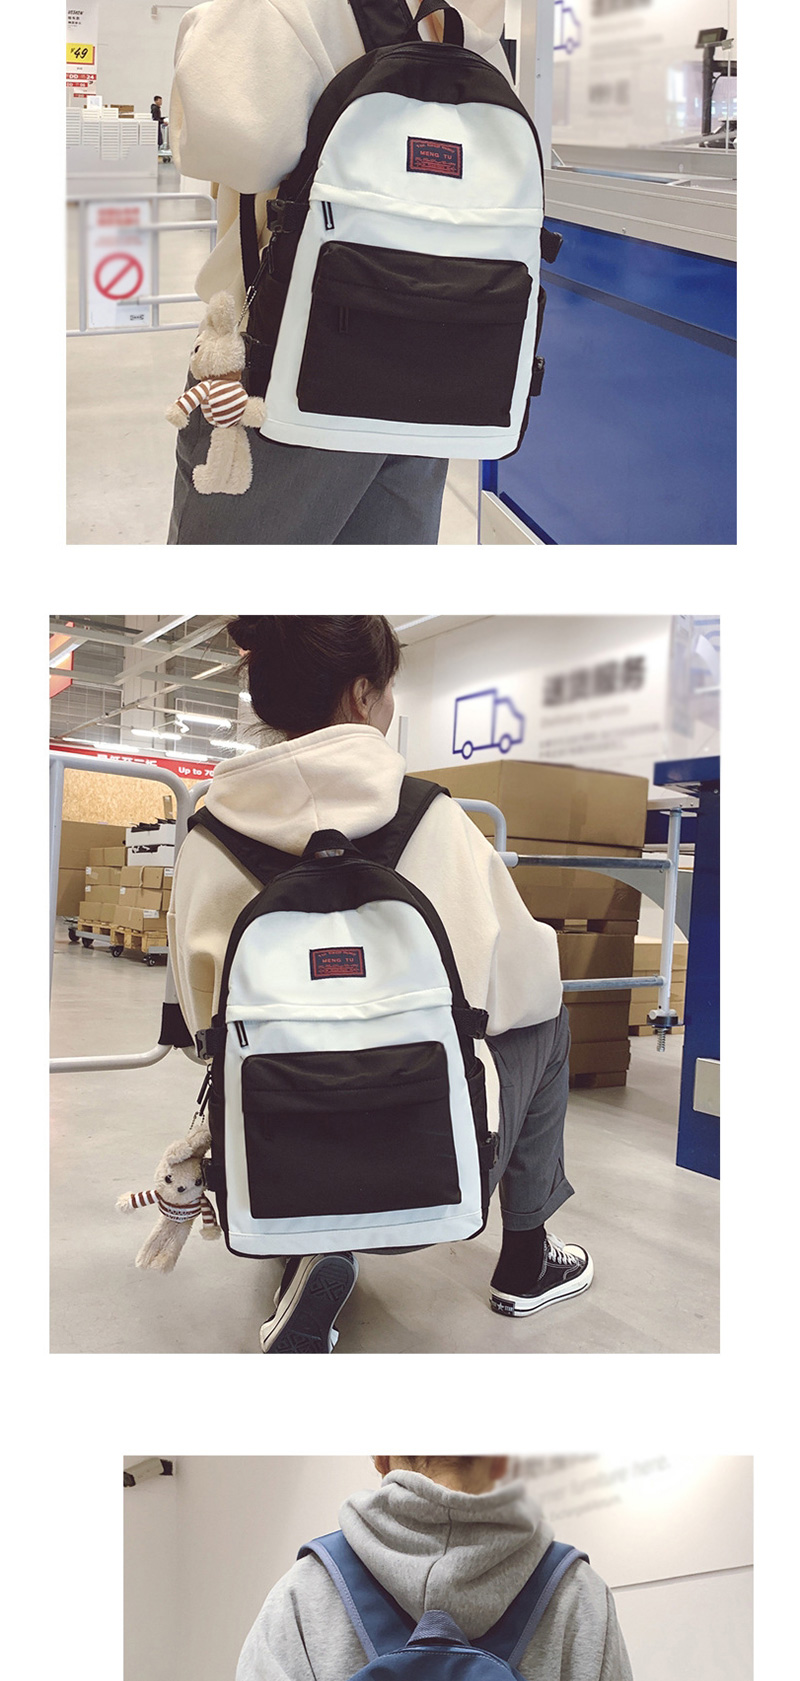 Fashion Blue With Pendant Stitched Contrast-print Alphabet Backpack,Backpack